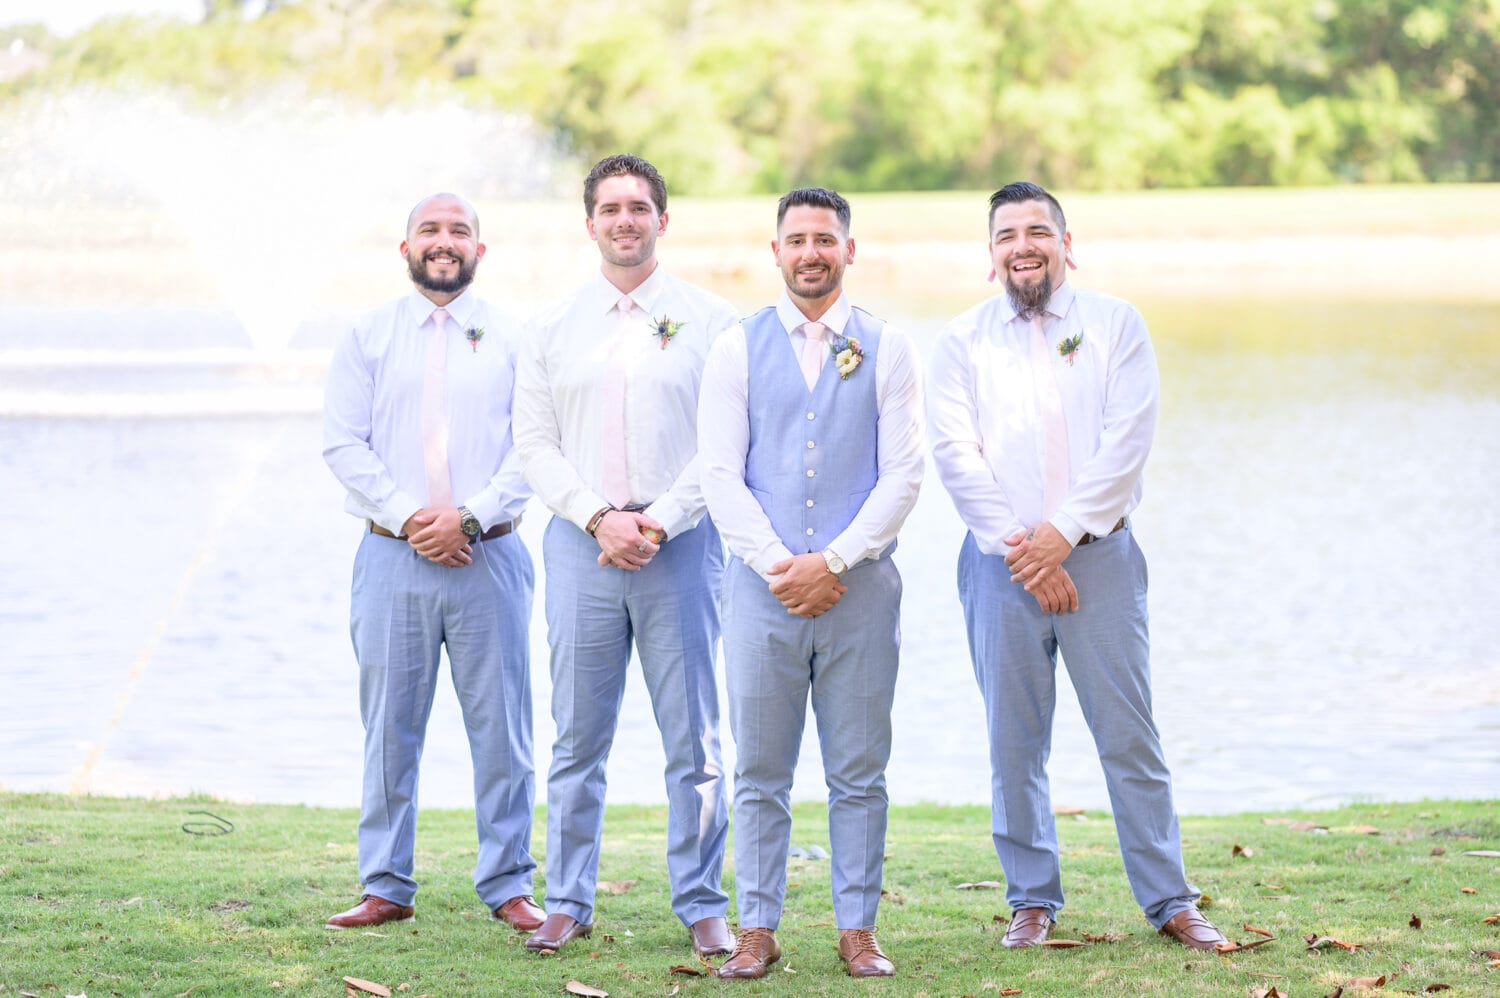 Pictures with the groomsmen - Pawleys Plantation Golf & Country Club